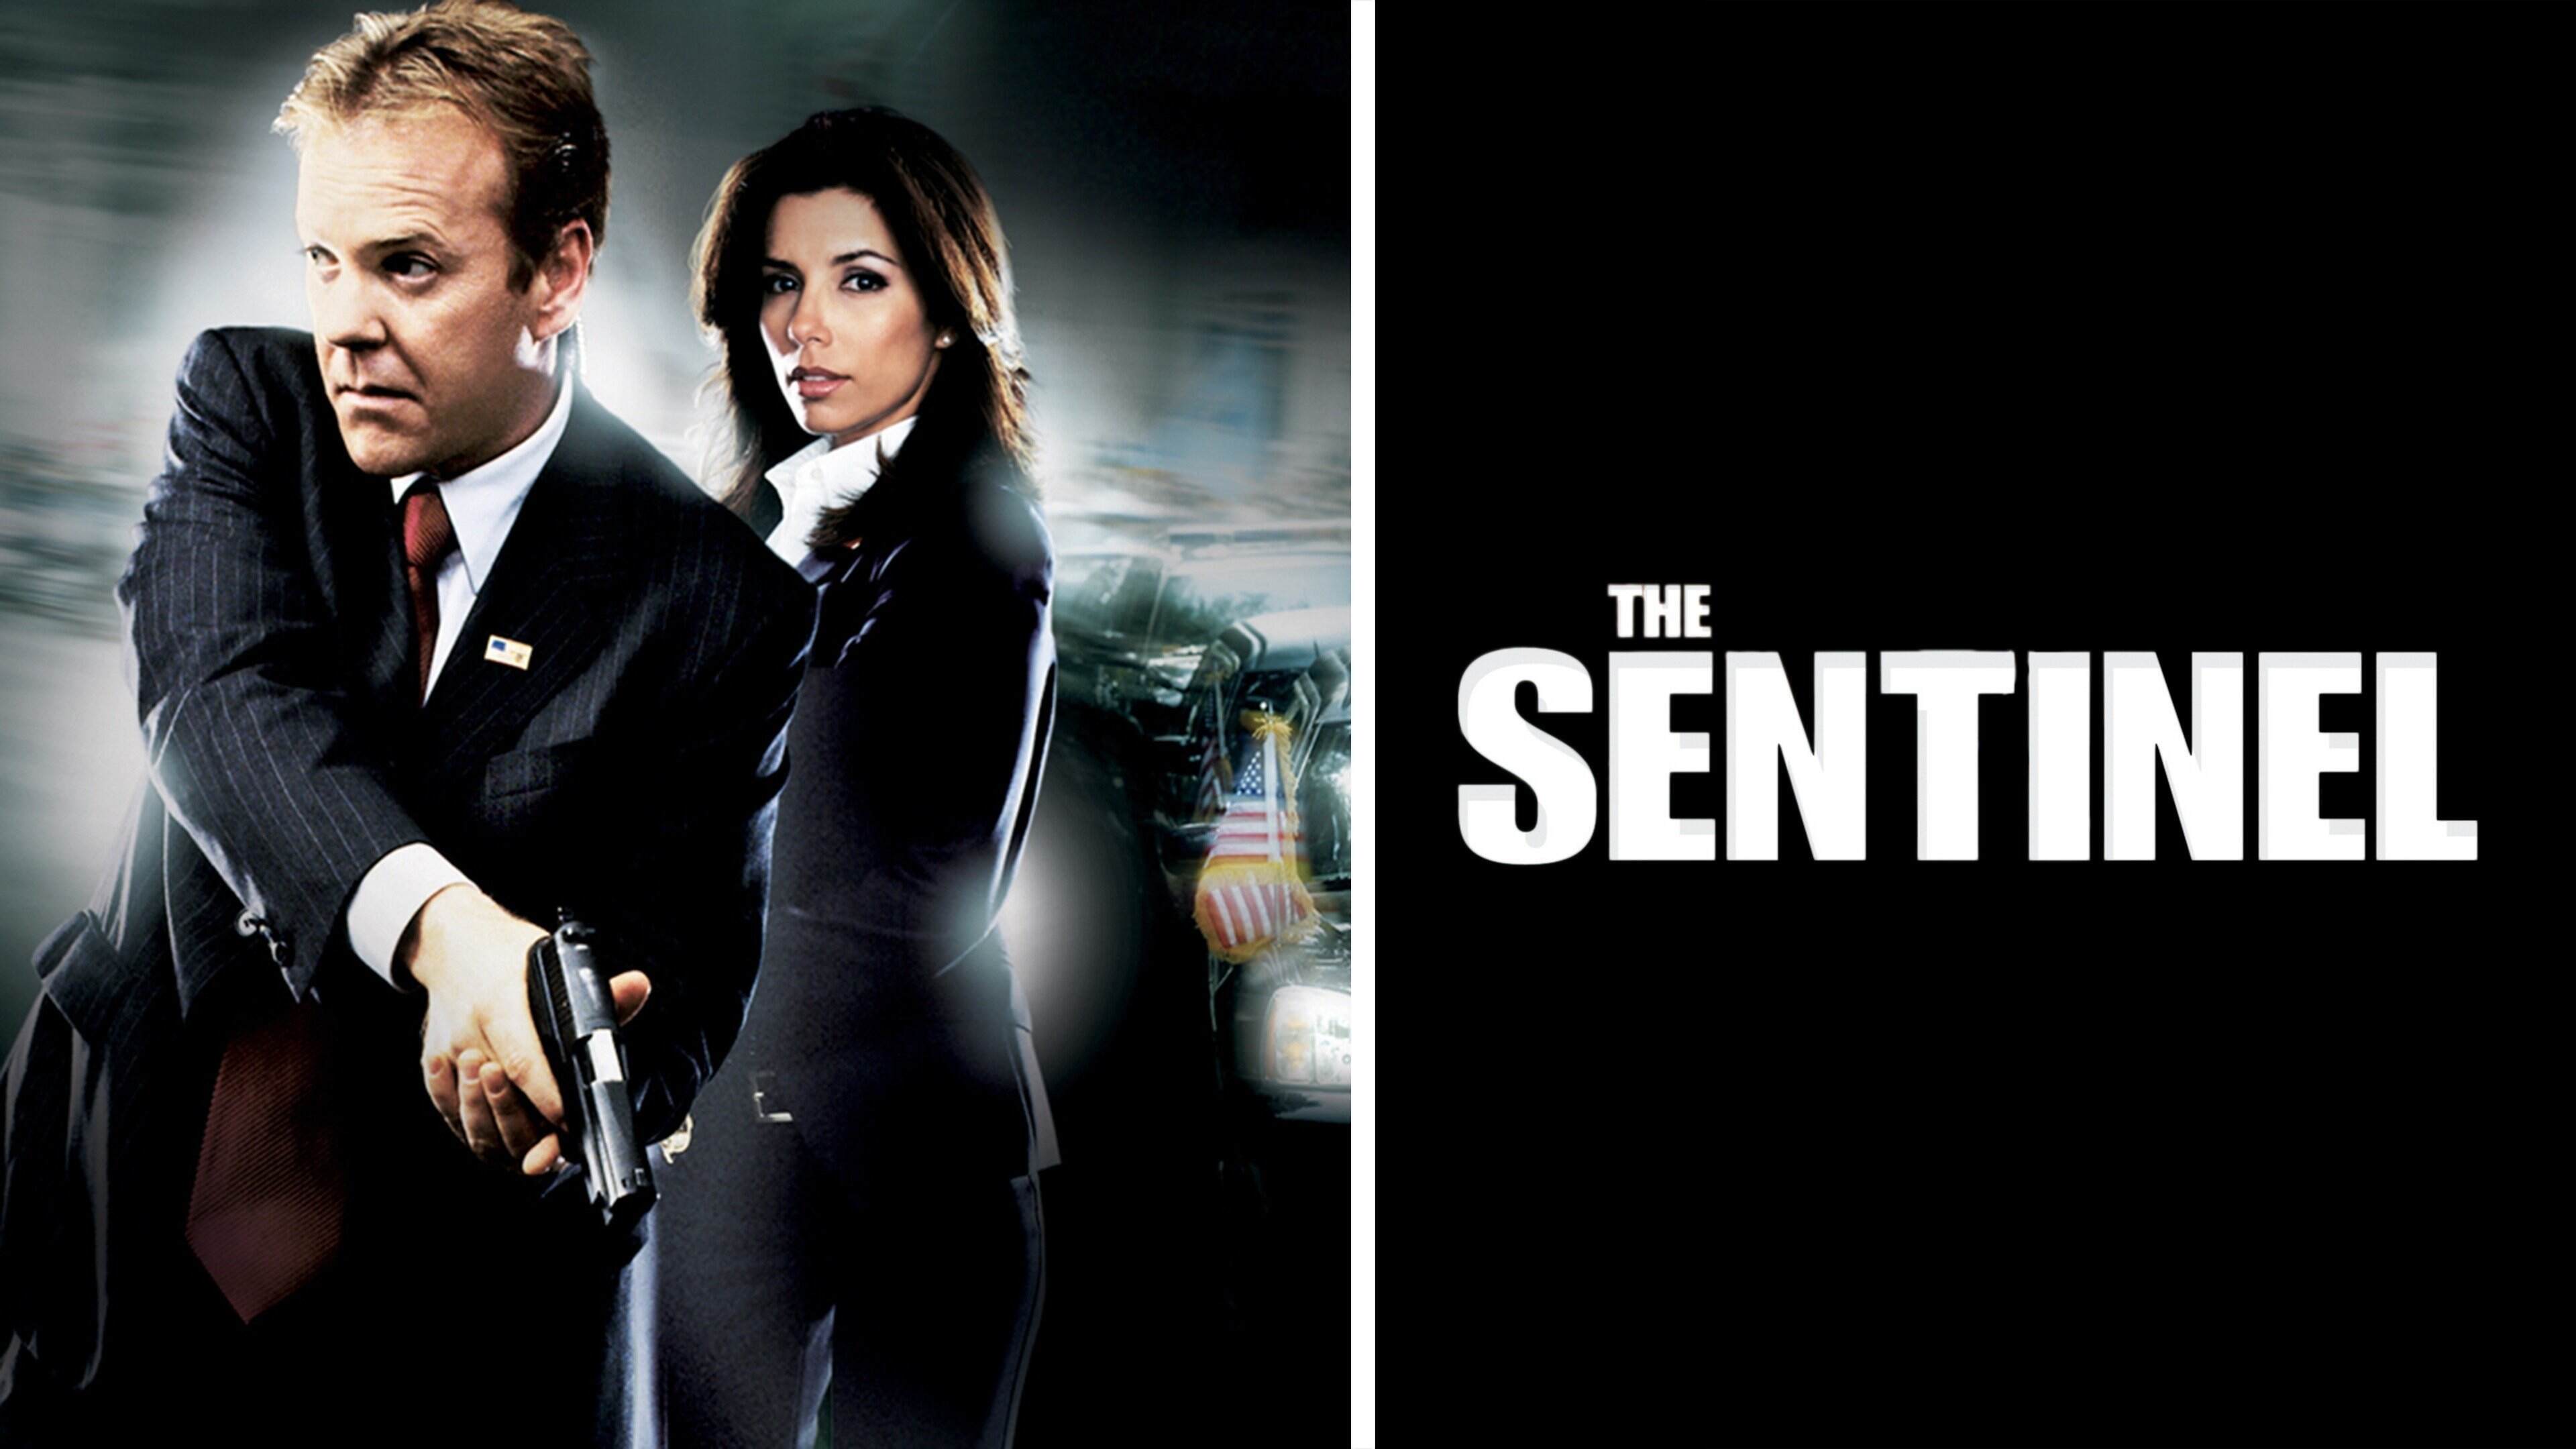 46-facts-about-the-movie-the-sentinel